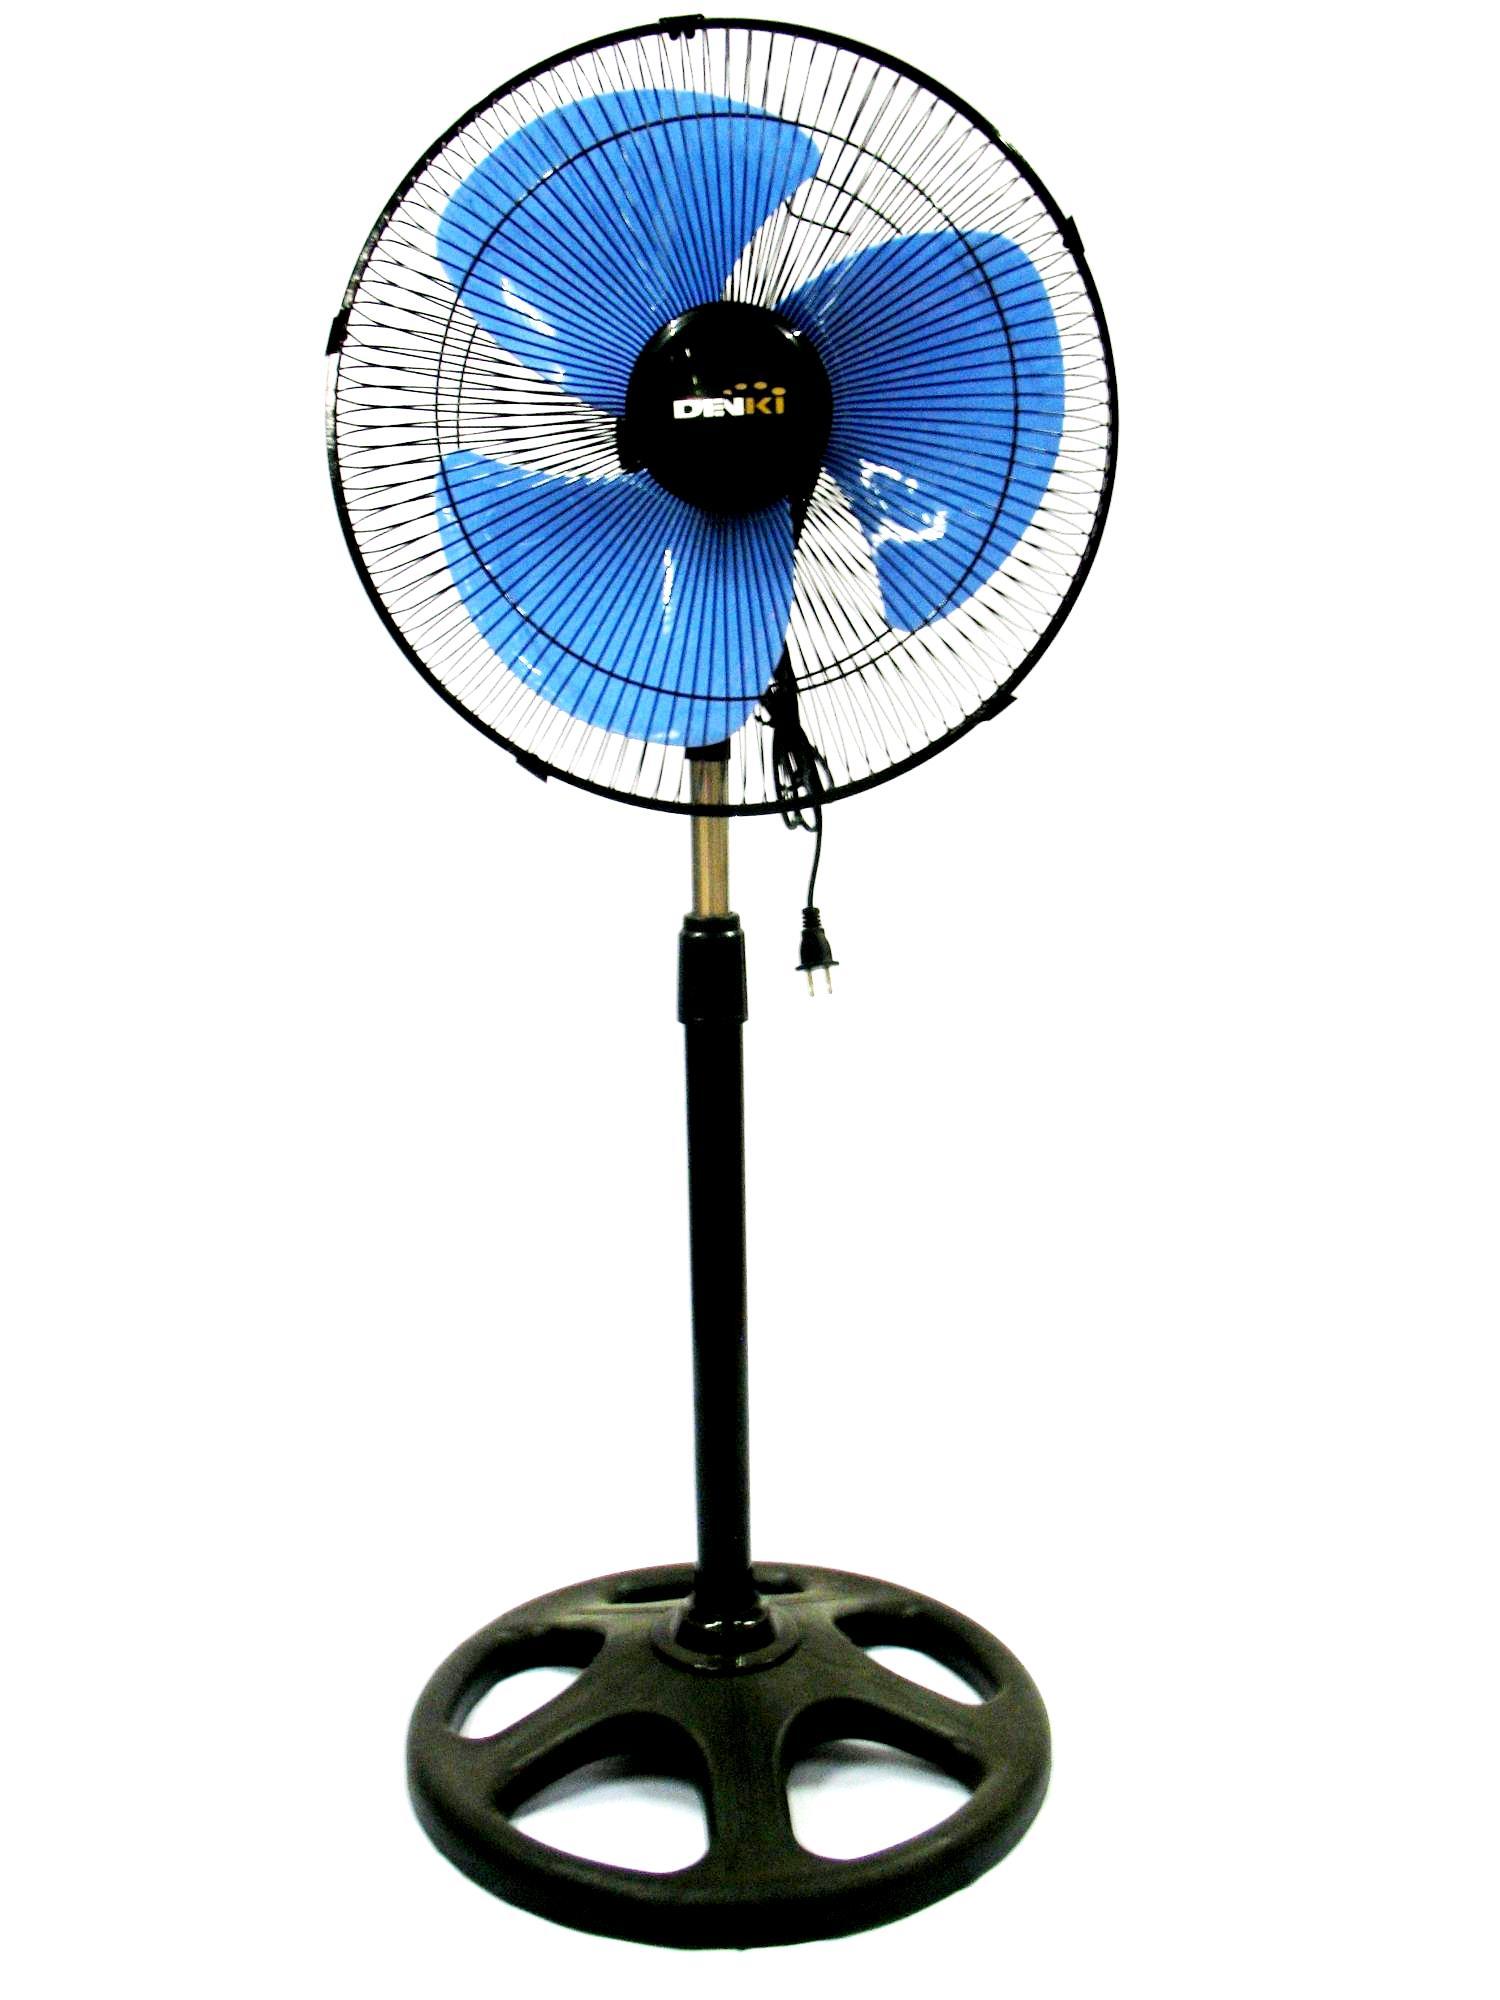 Standard Electric Fan Price Philippines See More on Home